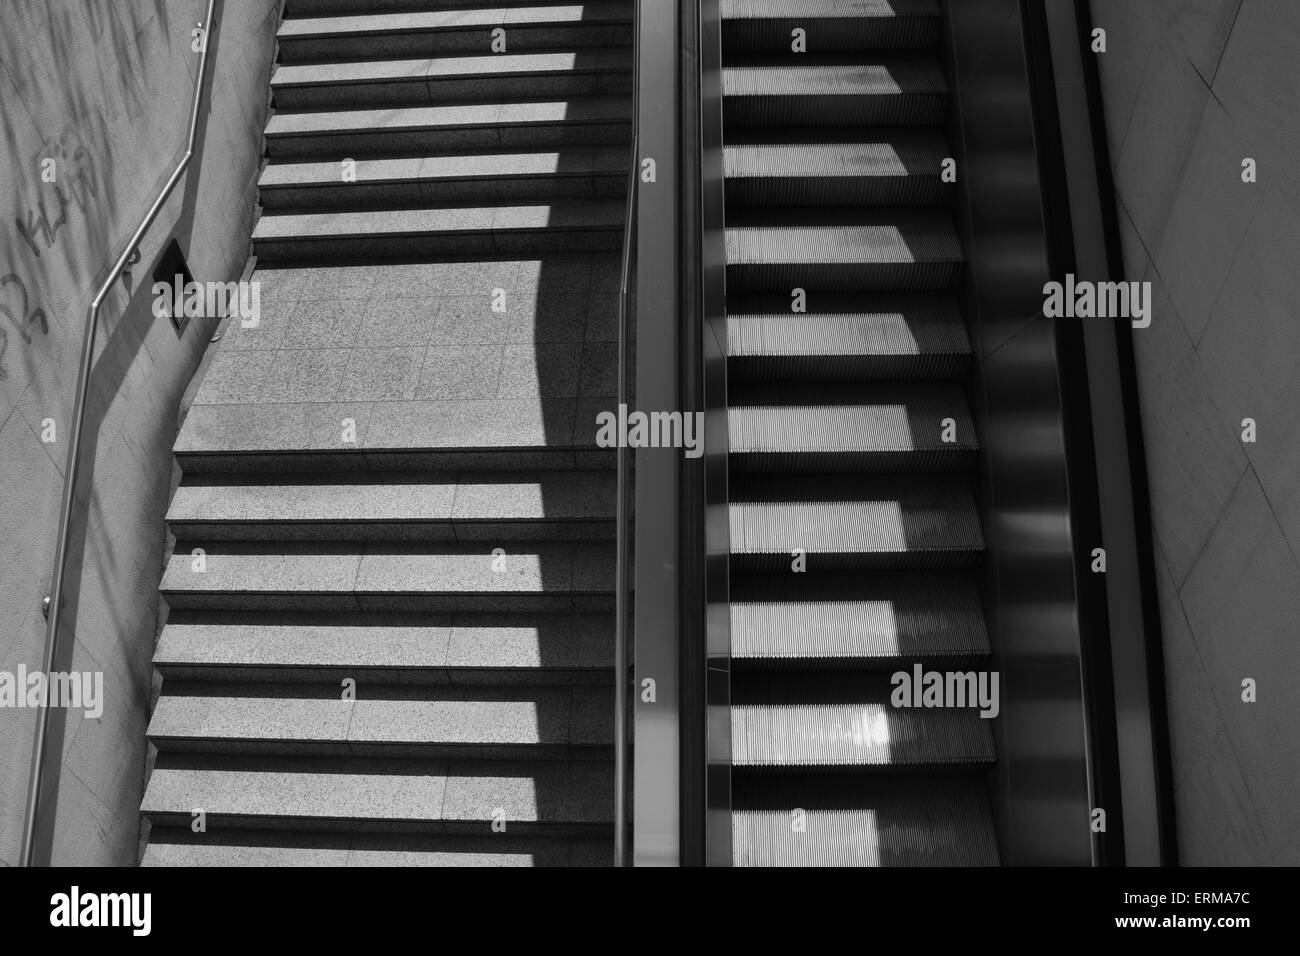 Staircase steps with handrail and escalator. Black and white. Stock Photo